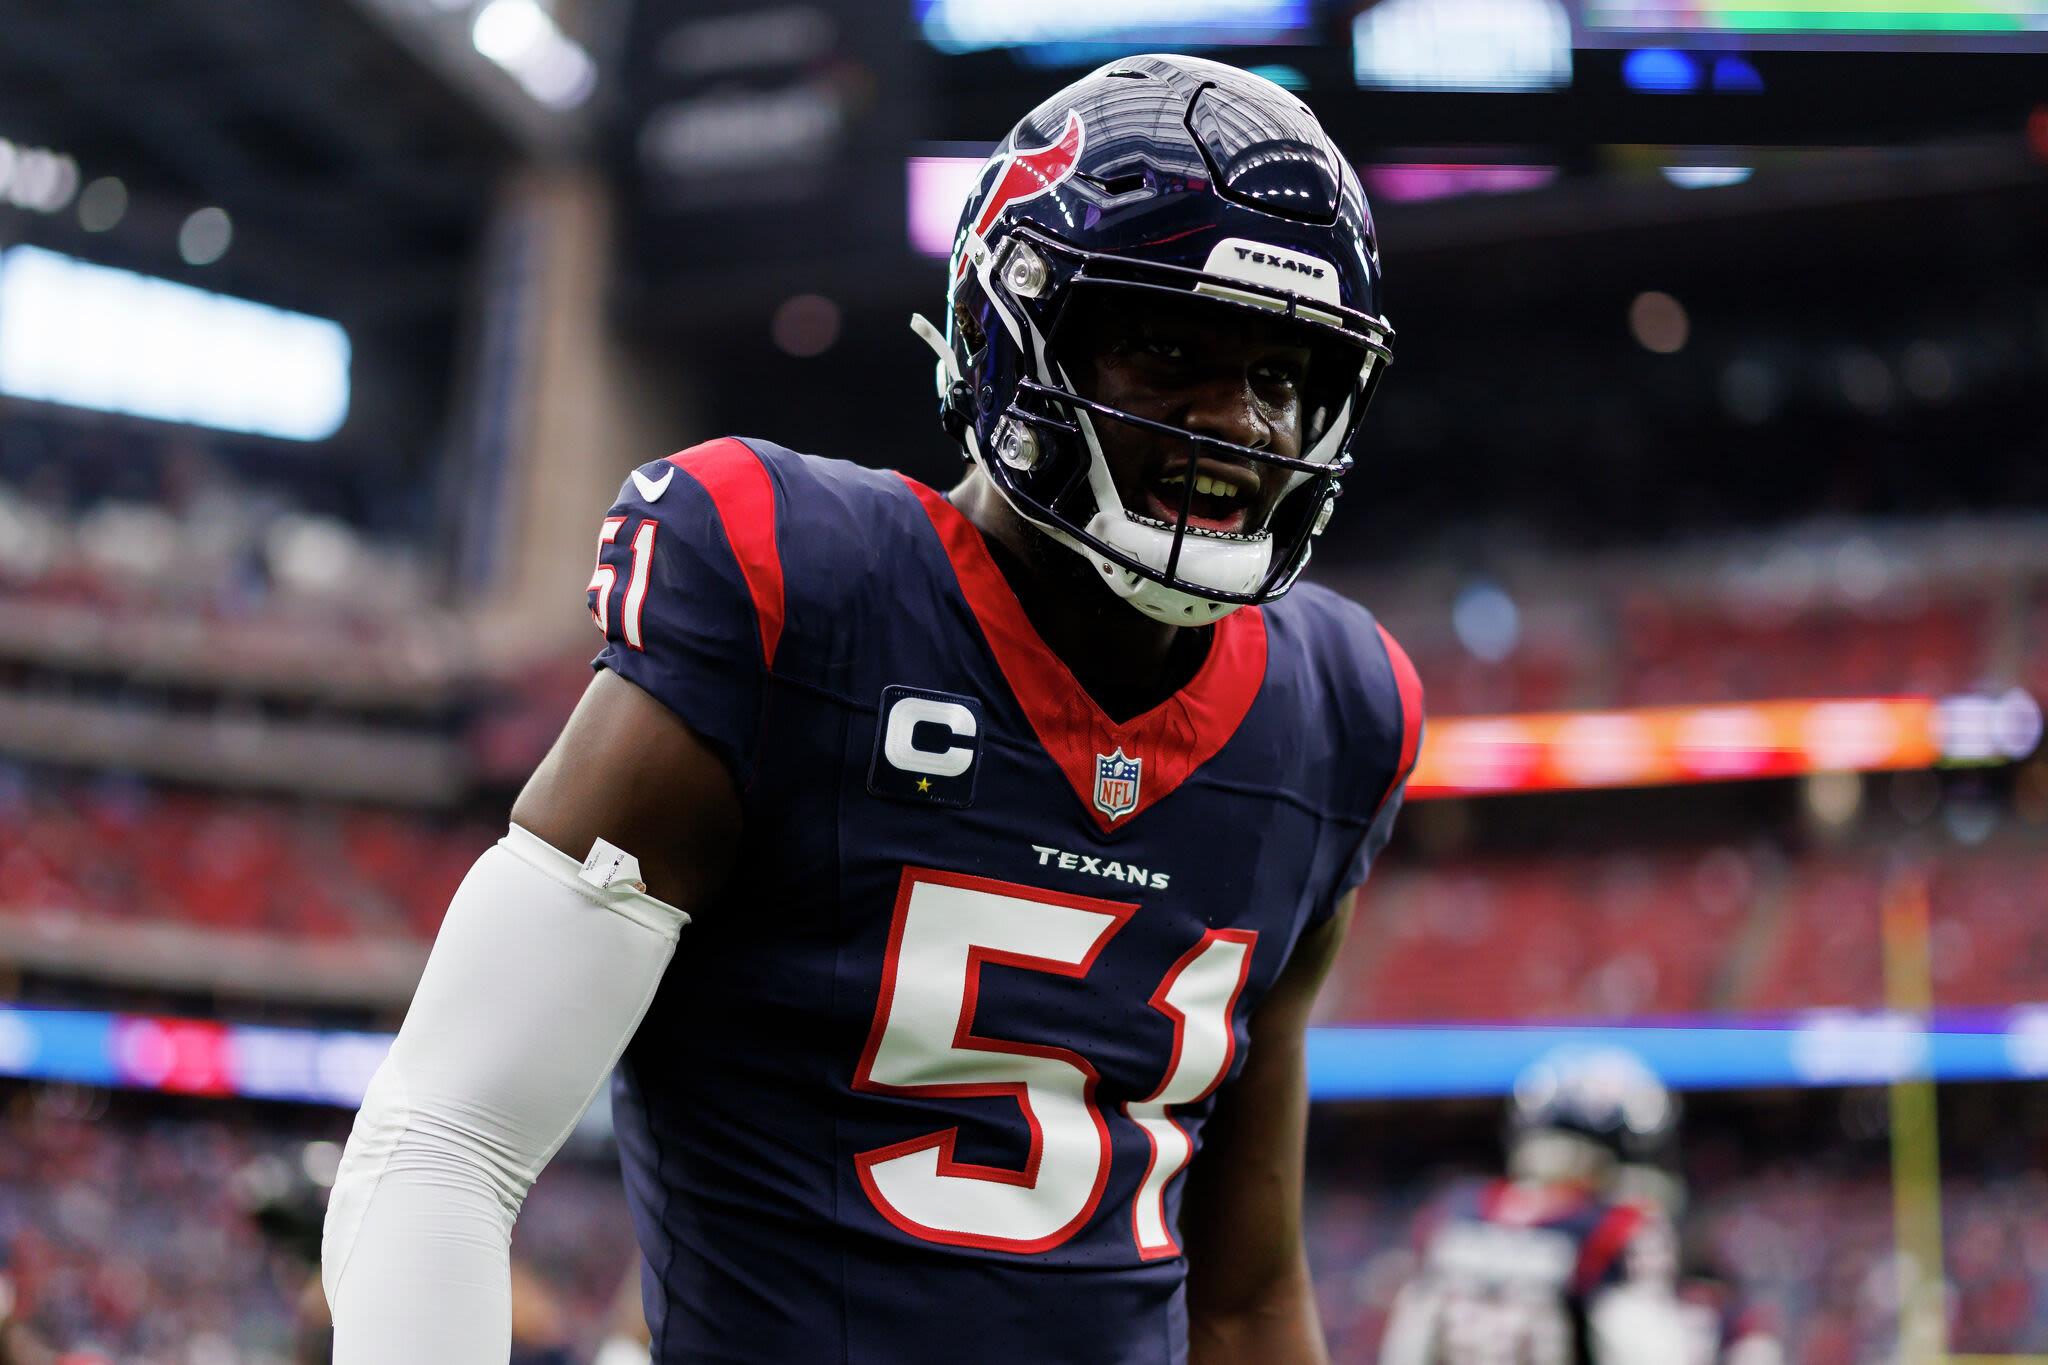 When it comes to NFL's young talent, Texans 'lap the field'